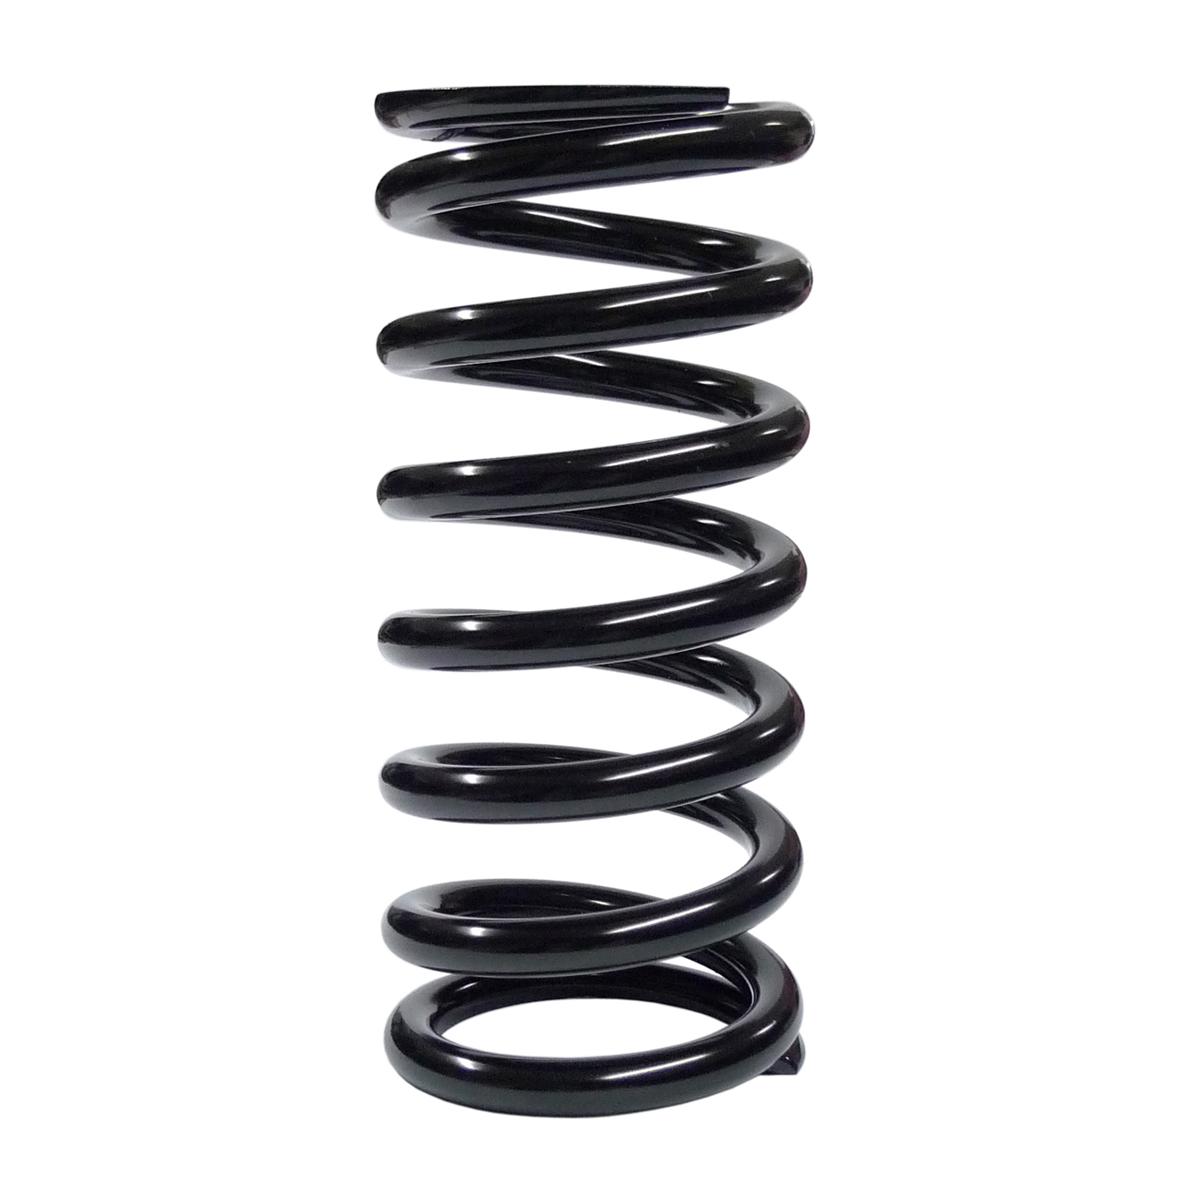 Coilover Spring Faulkner 12 Inches Long with 2.25 Inch Inside Diameter